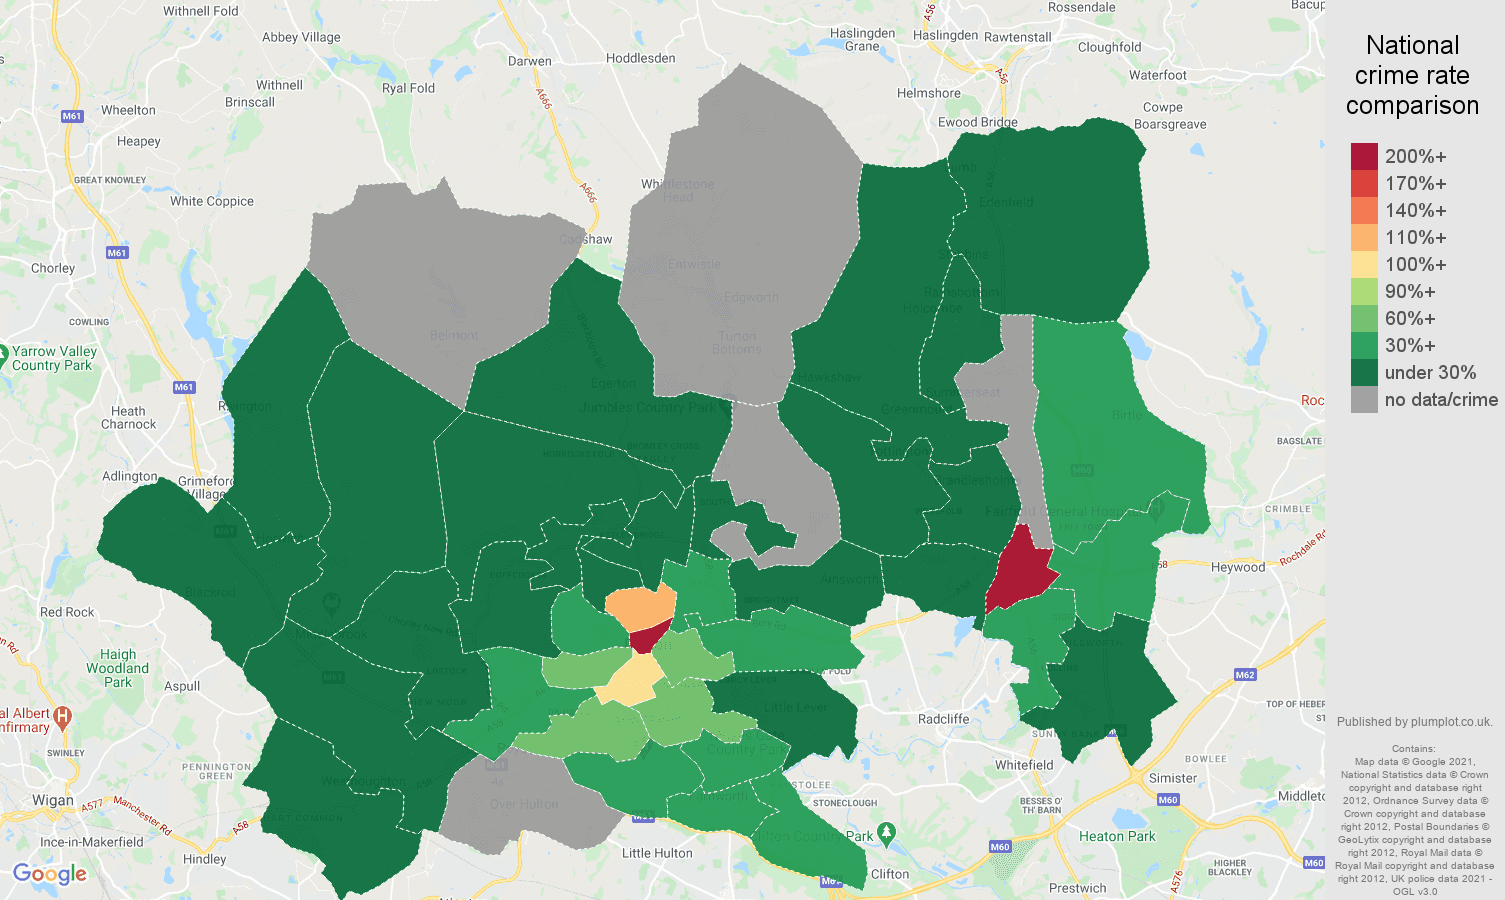 Bolton bicycle theft crime rate comparison map